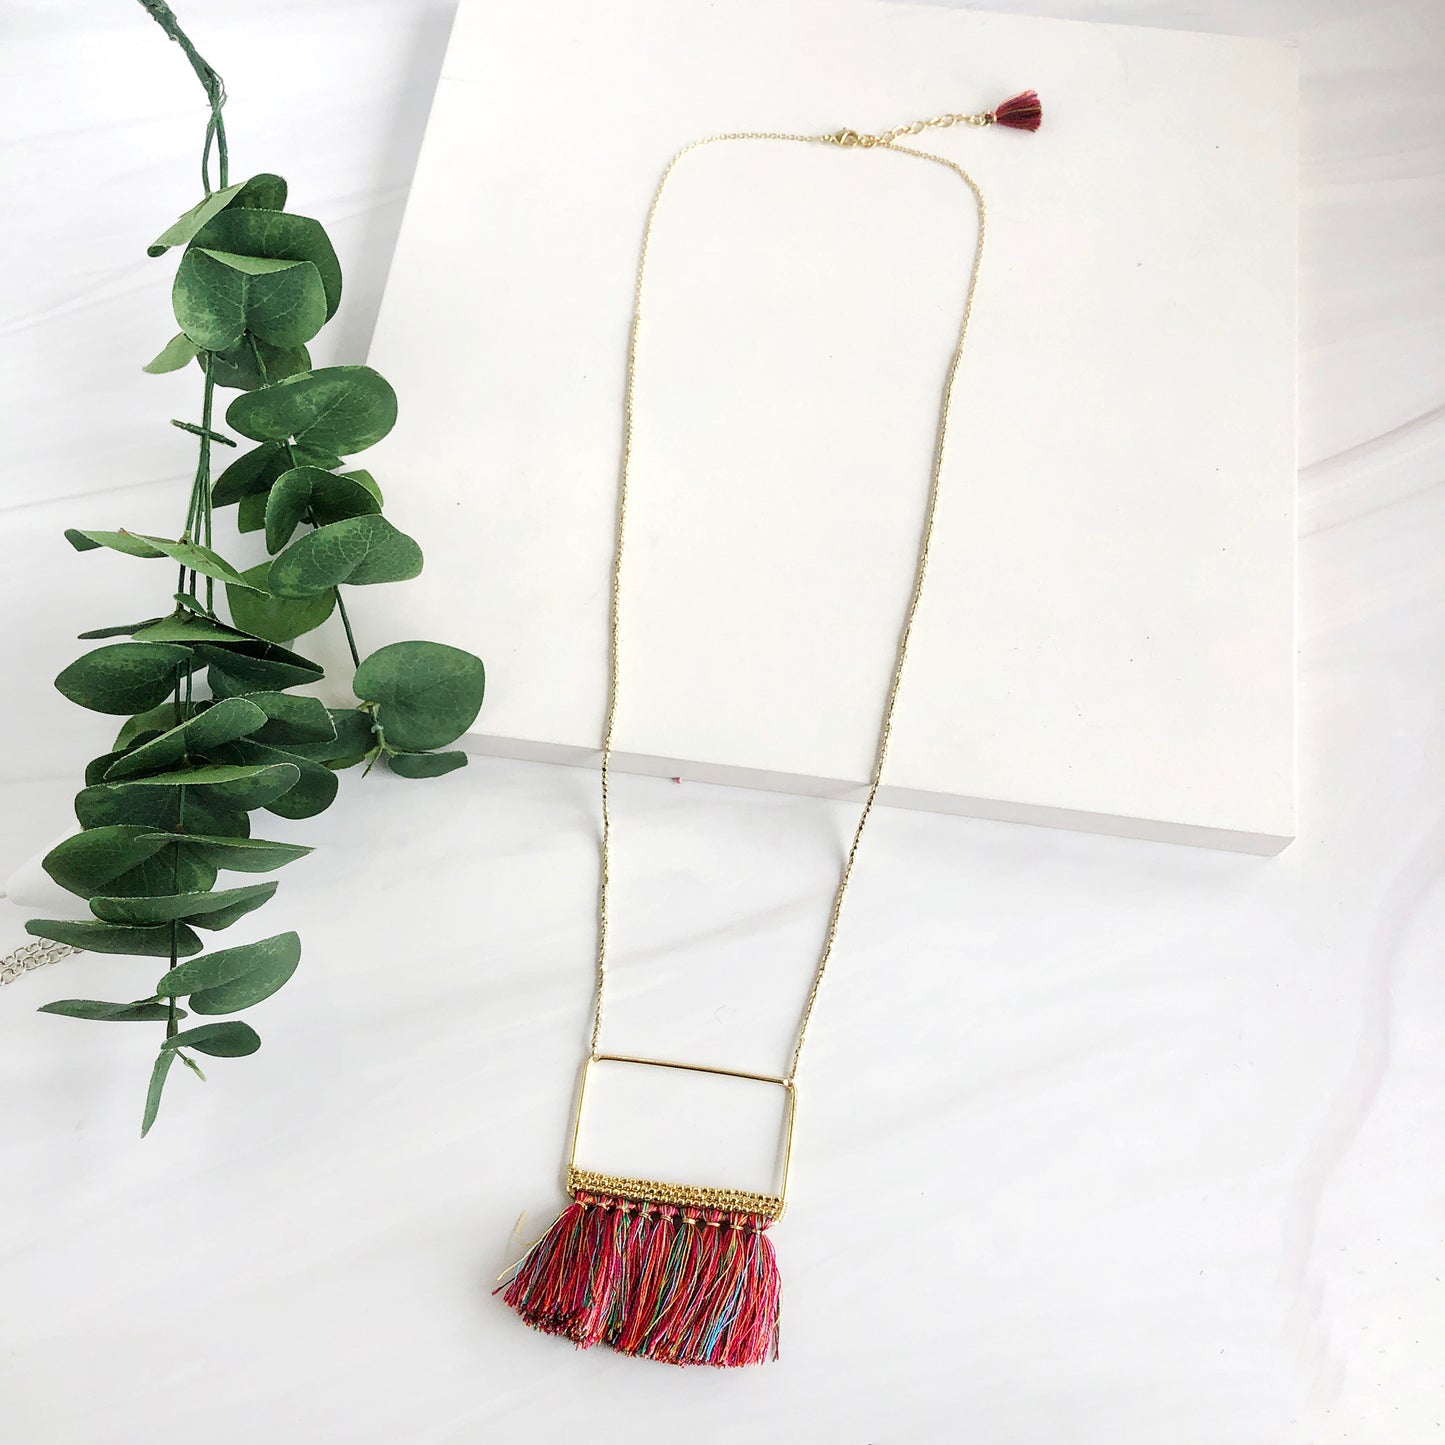 Rainbow hued tassels hang from a gold toned brass pendant, embellished with three rows of tiny brass beads.